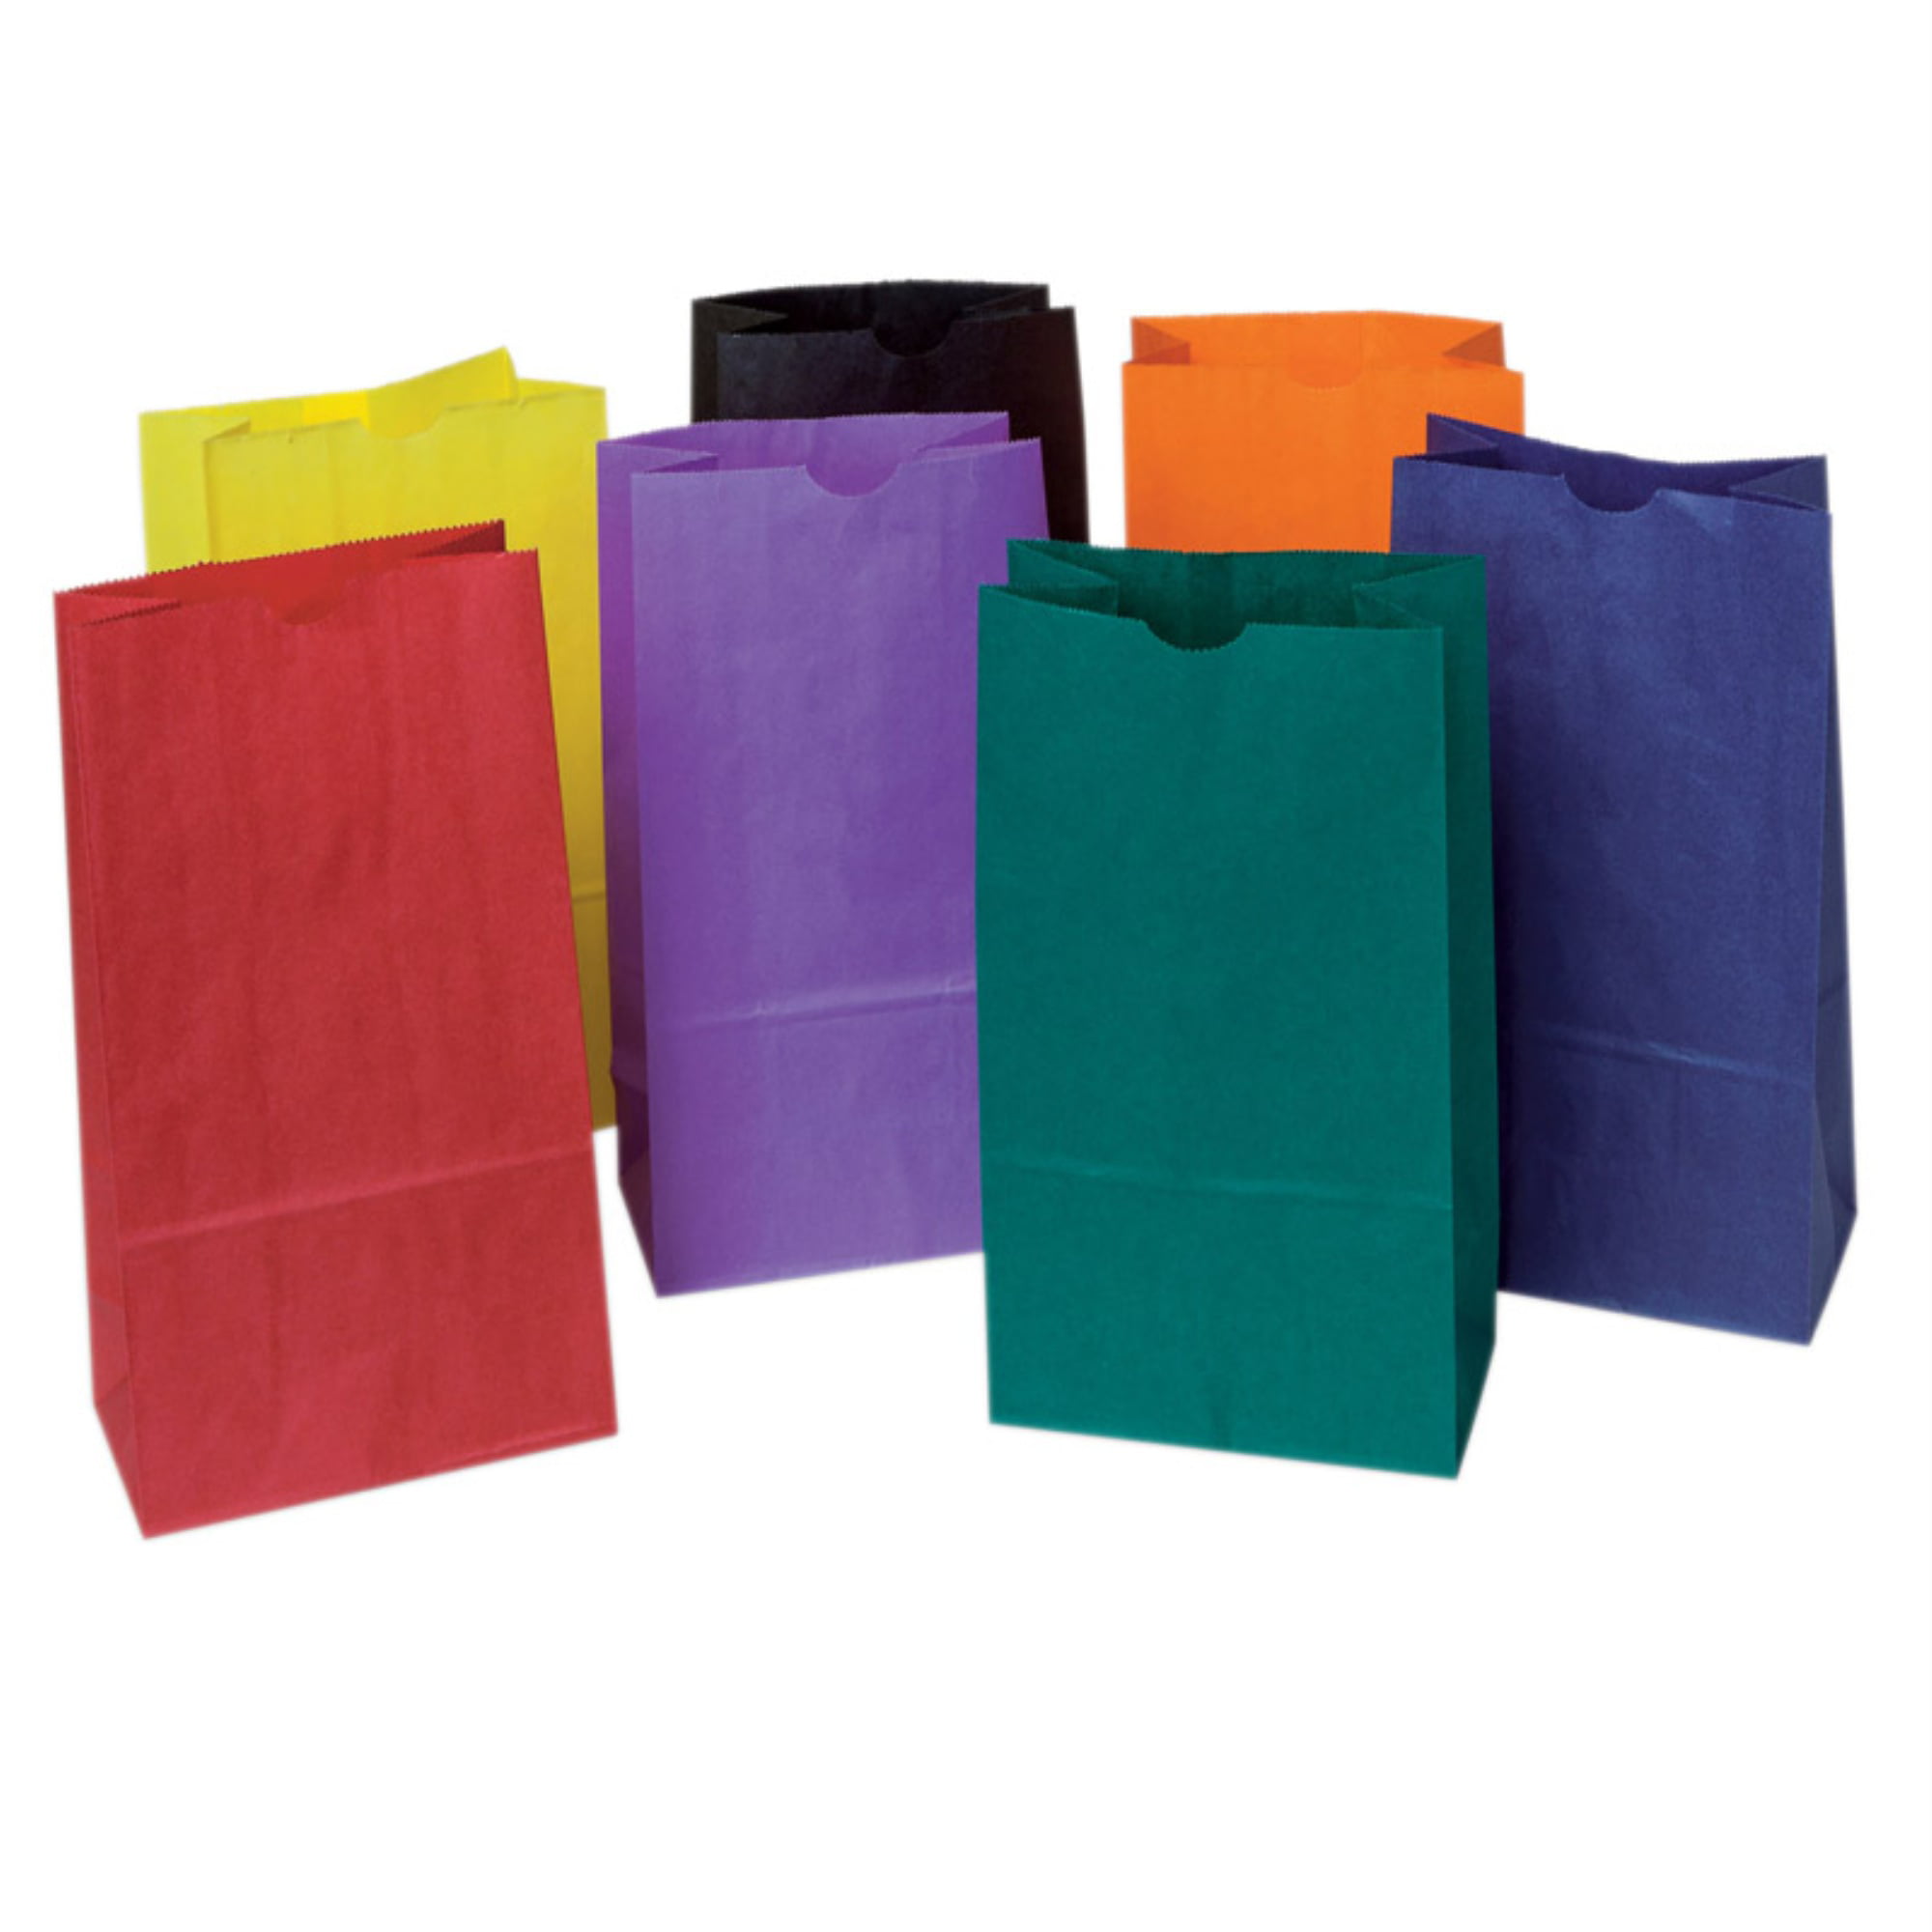 12 PURPLE DRAW STRING ORGANZA  BAGS  FOR  GIFT FOR RED HAT LADIES OF SOCIETY 